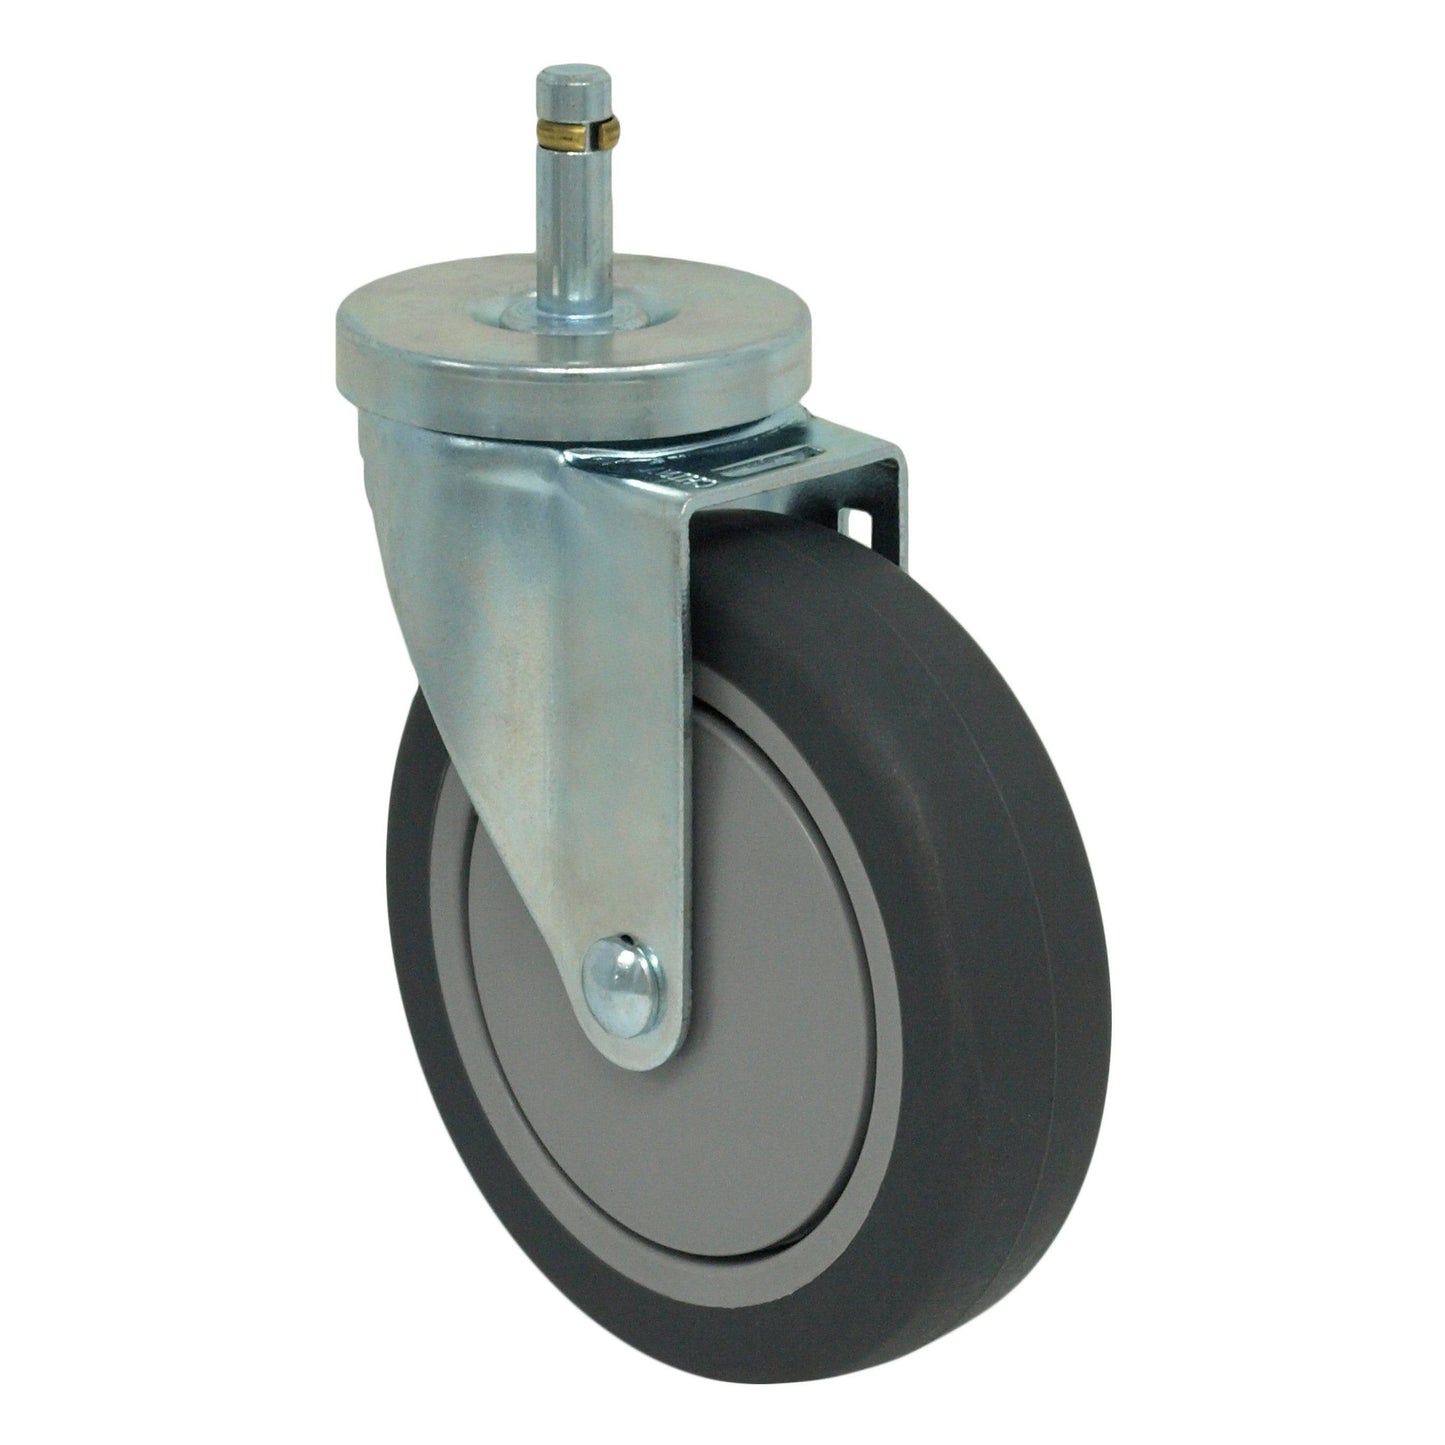 5" x 1-1/4" Thermo-Pro Swivel Grip Ring Stem Caster (7/16")  - 300 lbs. Cap. - Durable Superior Casters